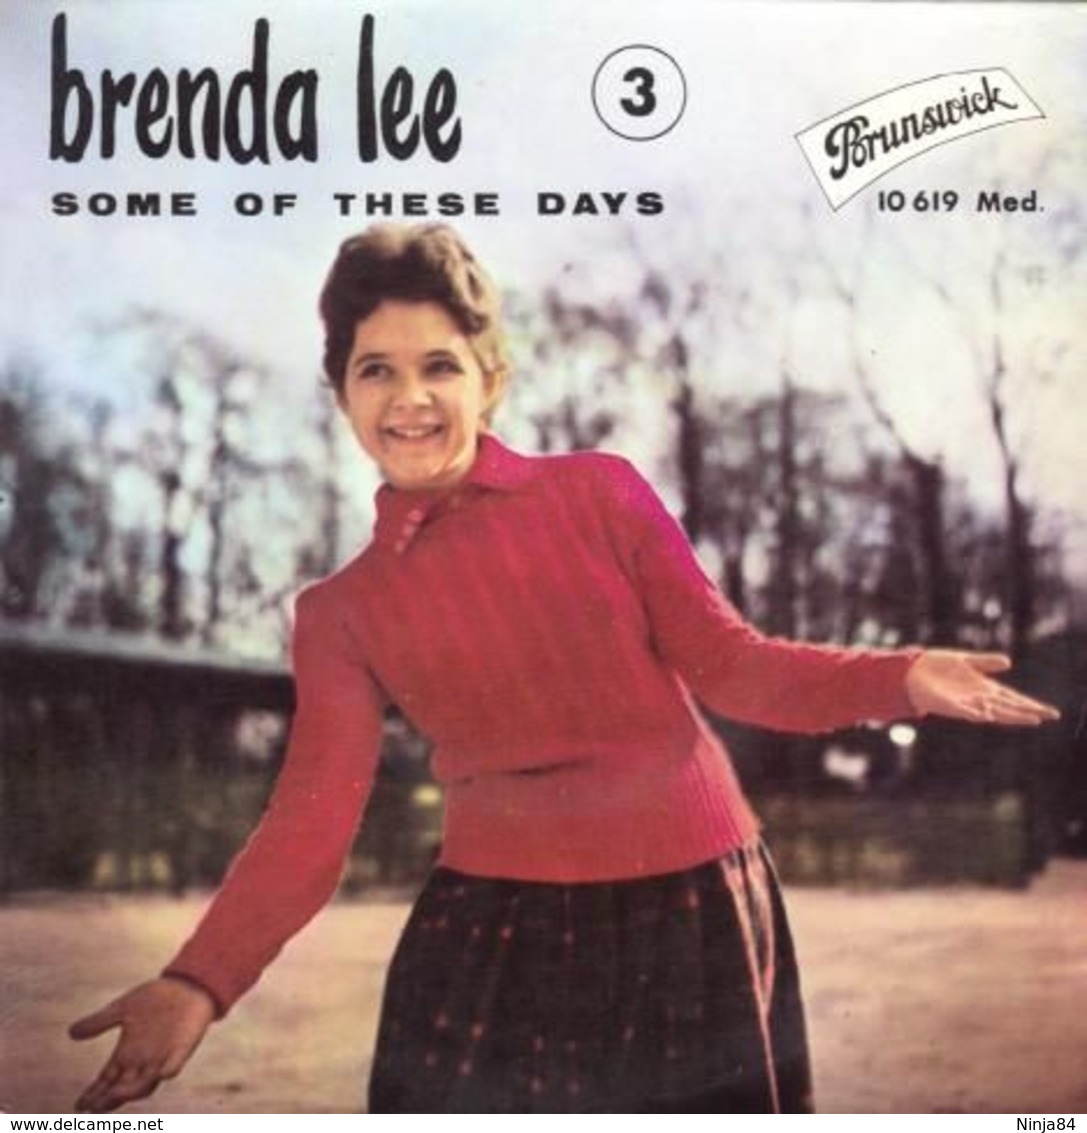 EP 45 RPM (7")  Brenda Lee " Some Of These Days " - Rock